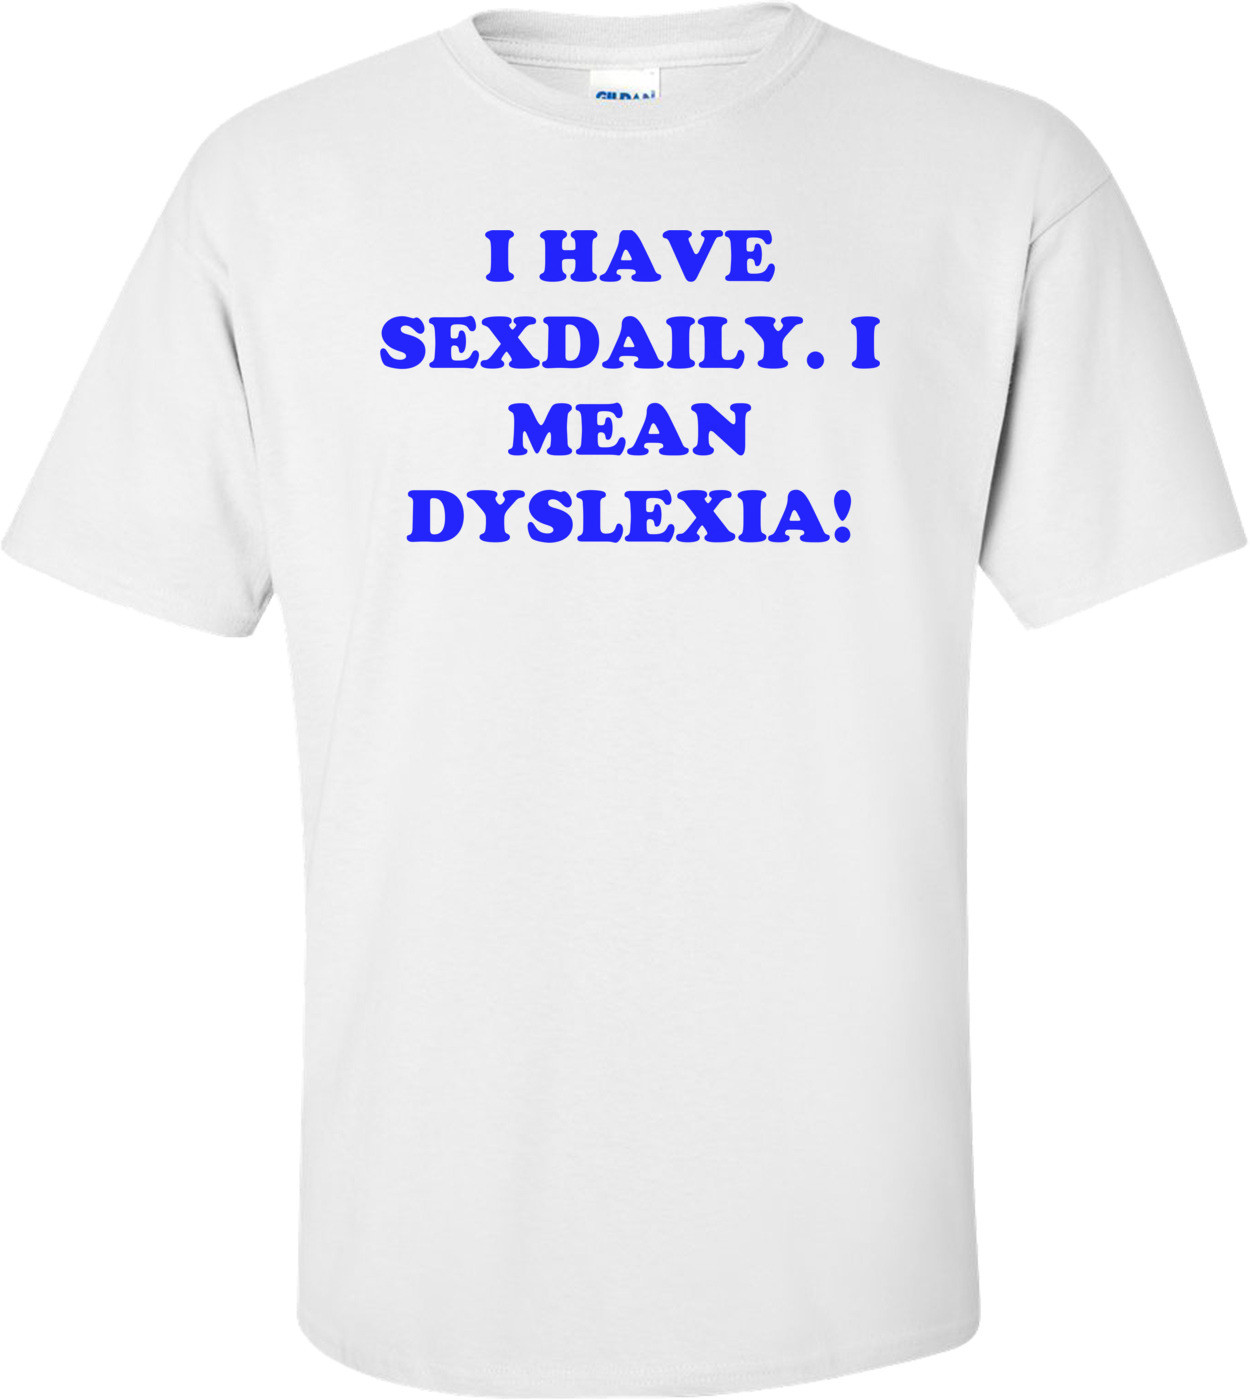 I HAVE SEXDAILY. I MEAN DYSLEXIA! Shirt